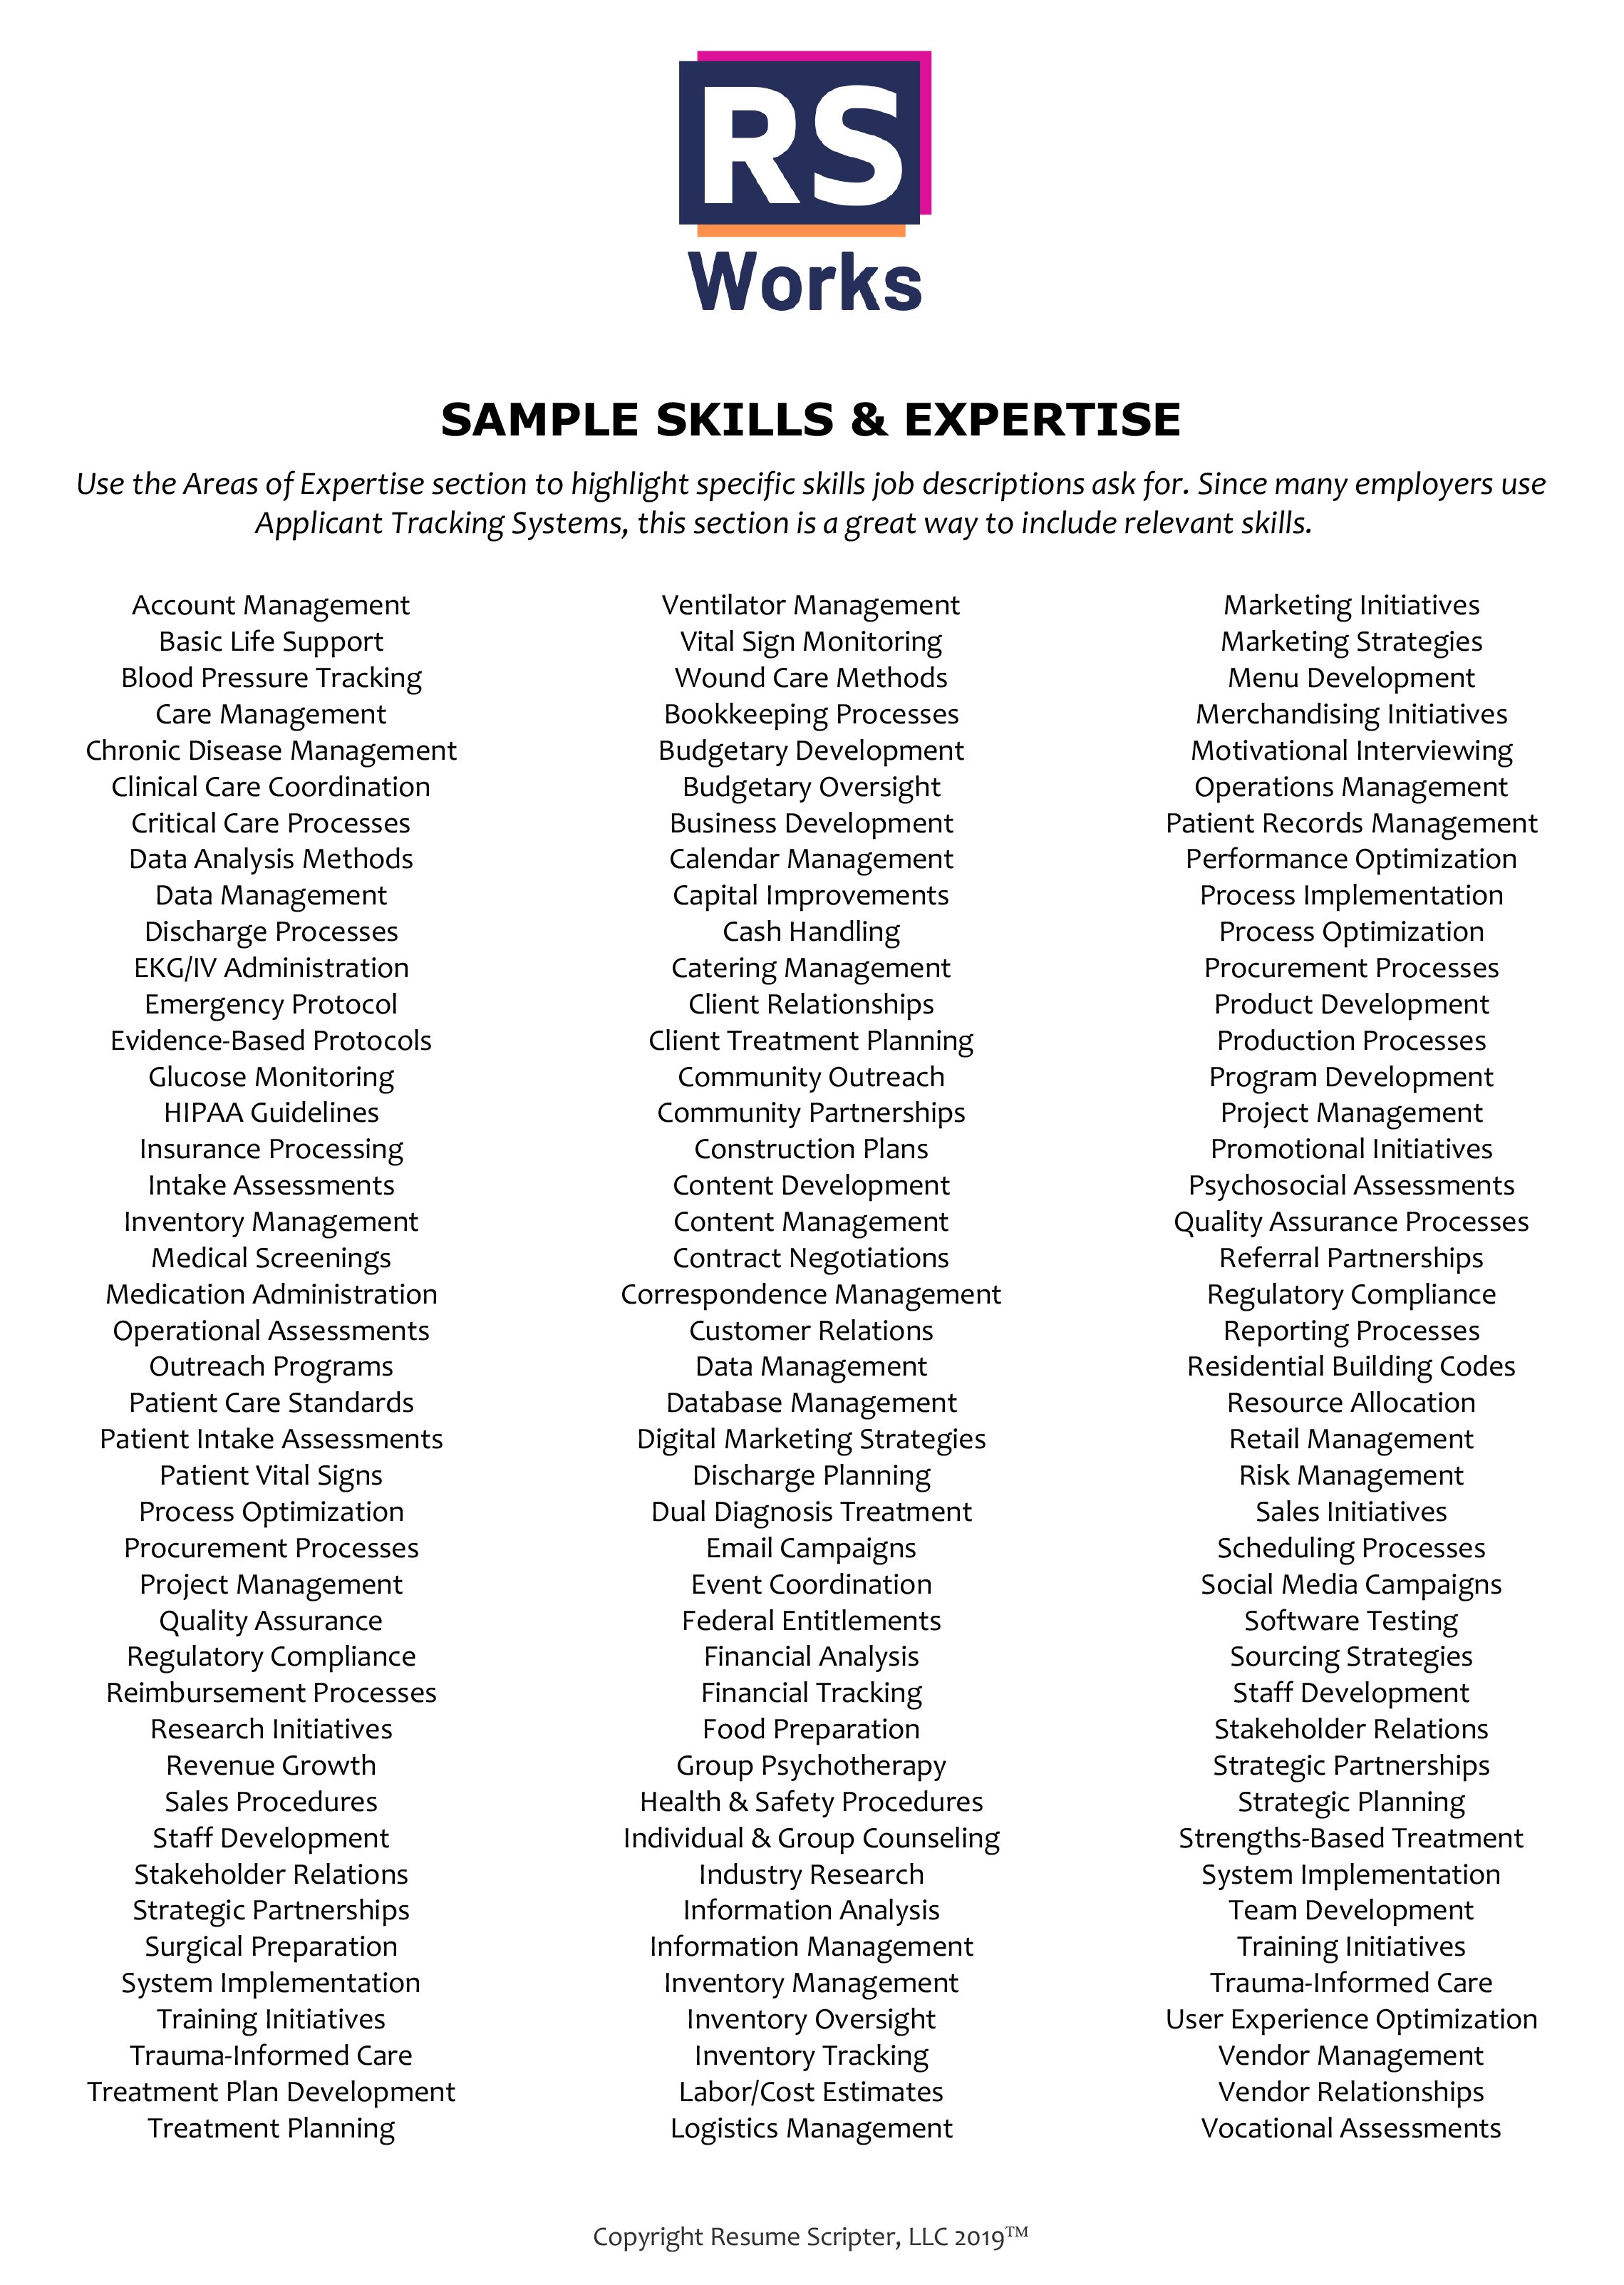 Areas-of-Expertise